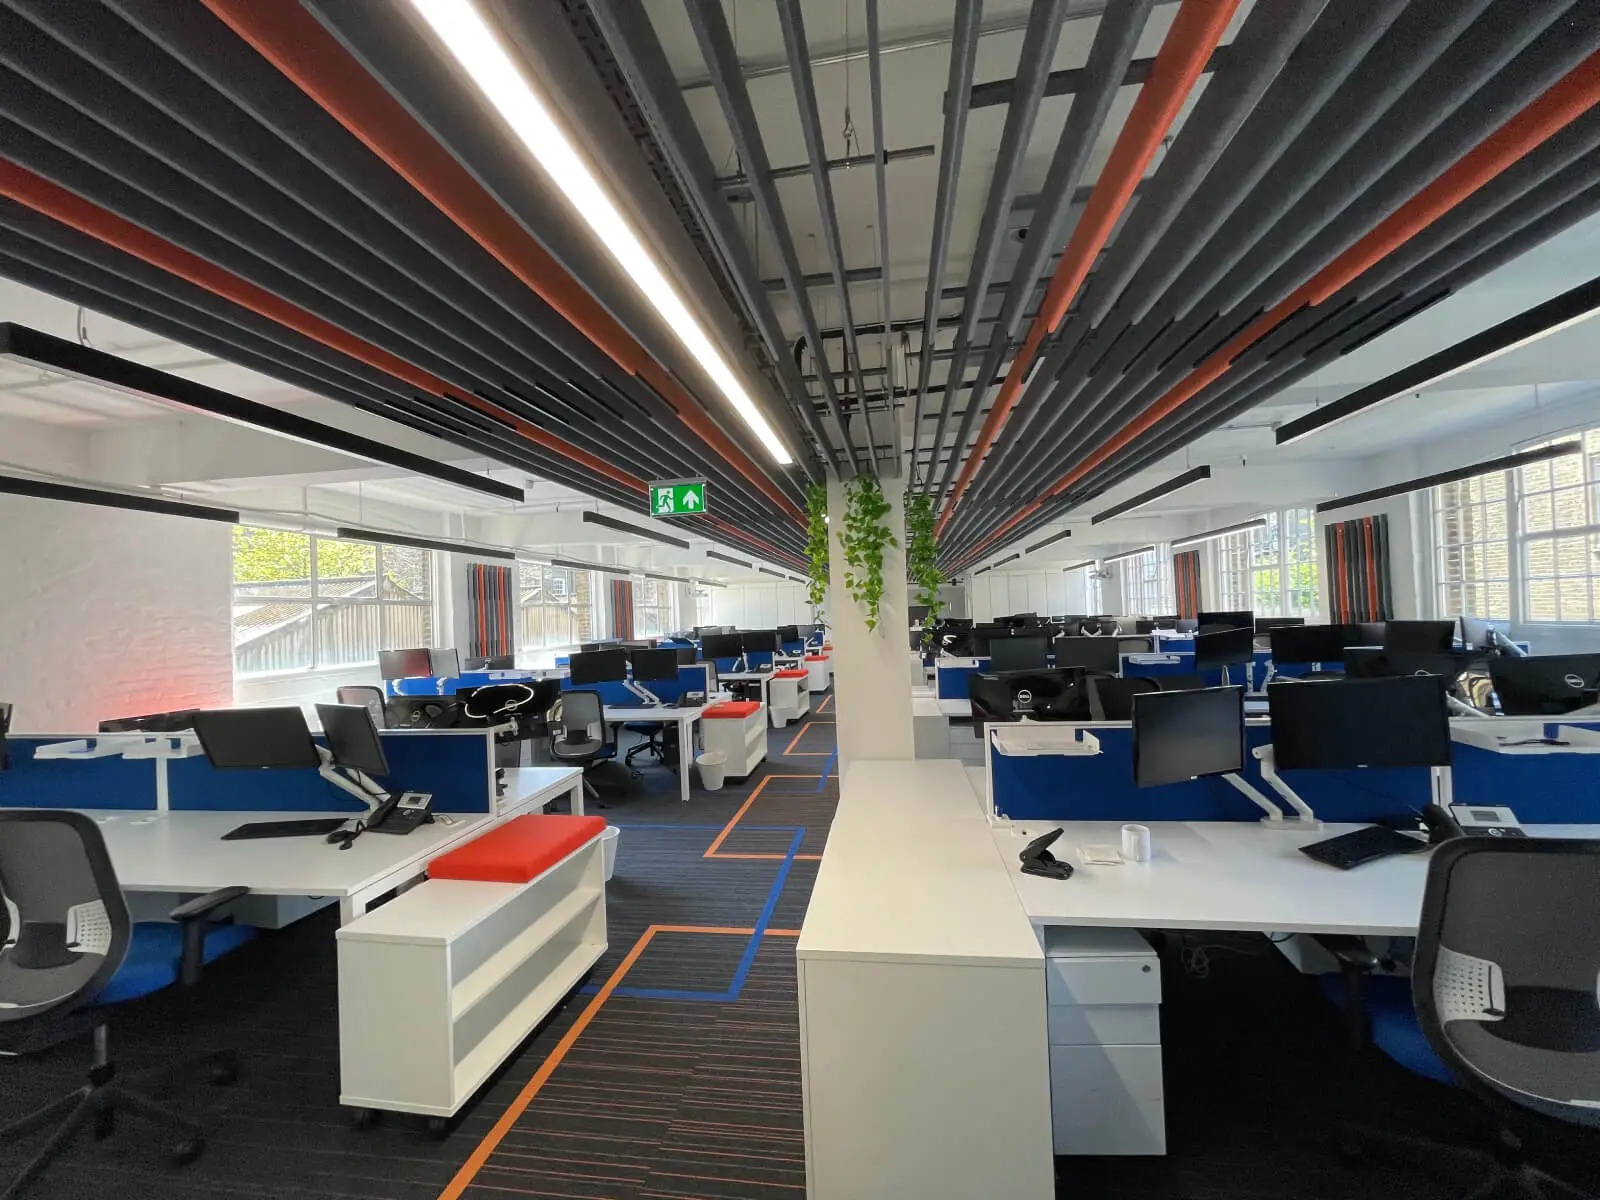 Office fit out with acoustic ceiling